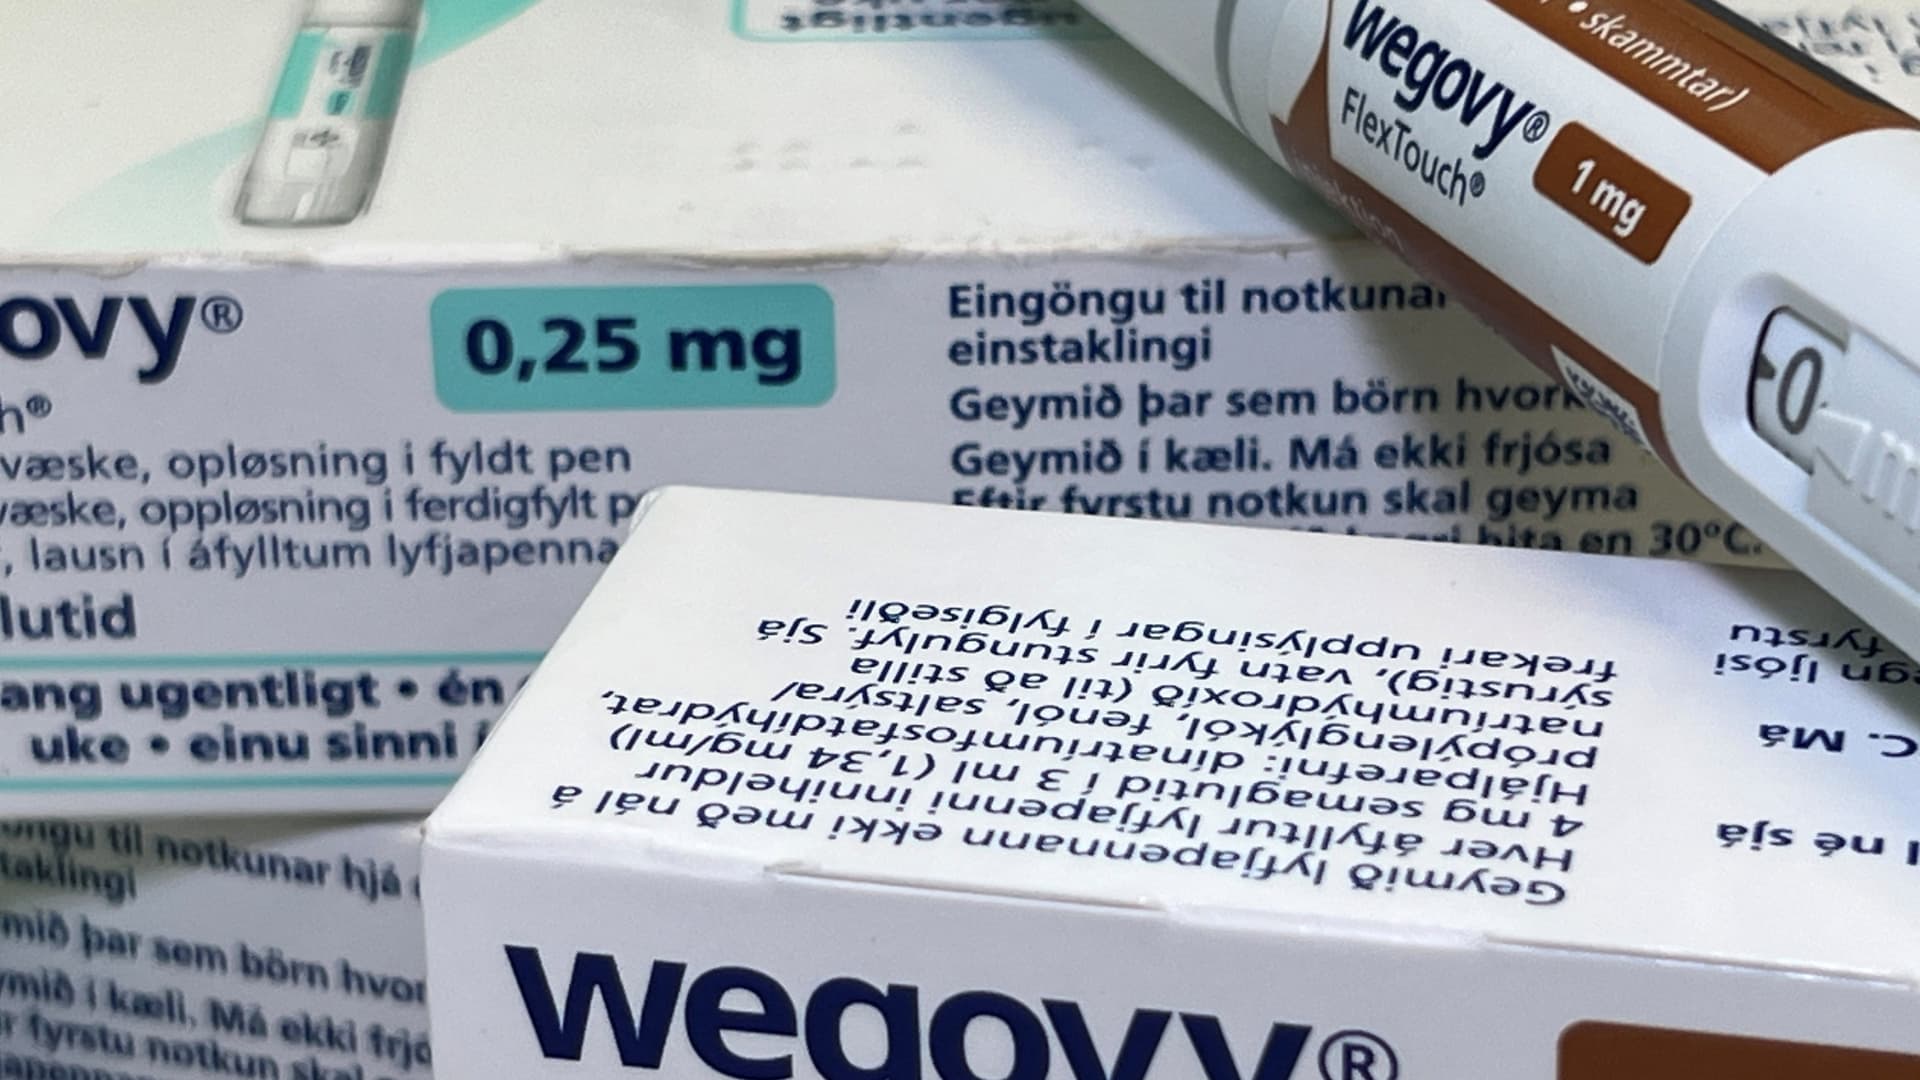 Weight loss drug Wegovy is now approved for heart health — but that won't mean broad insurance coverage just yet